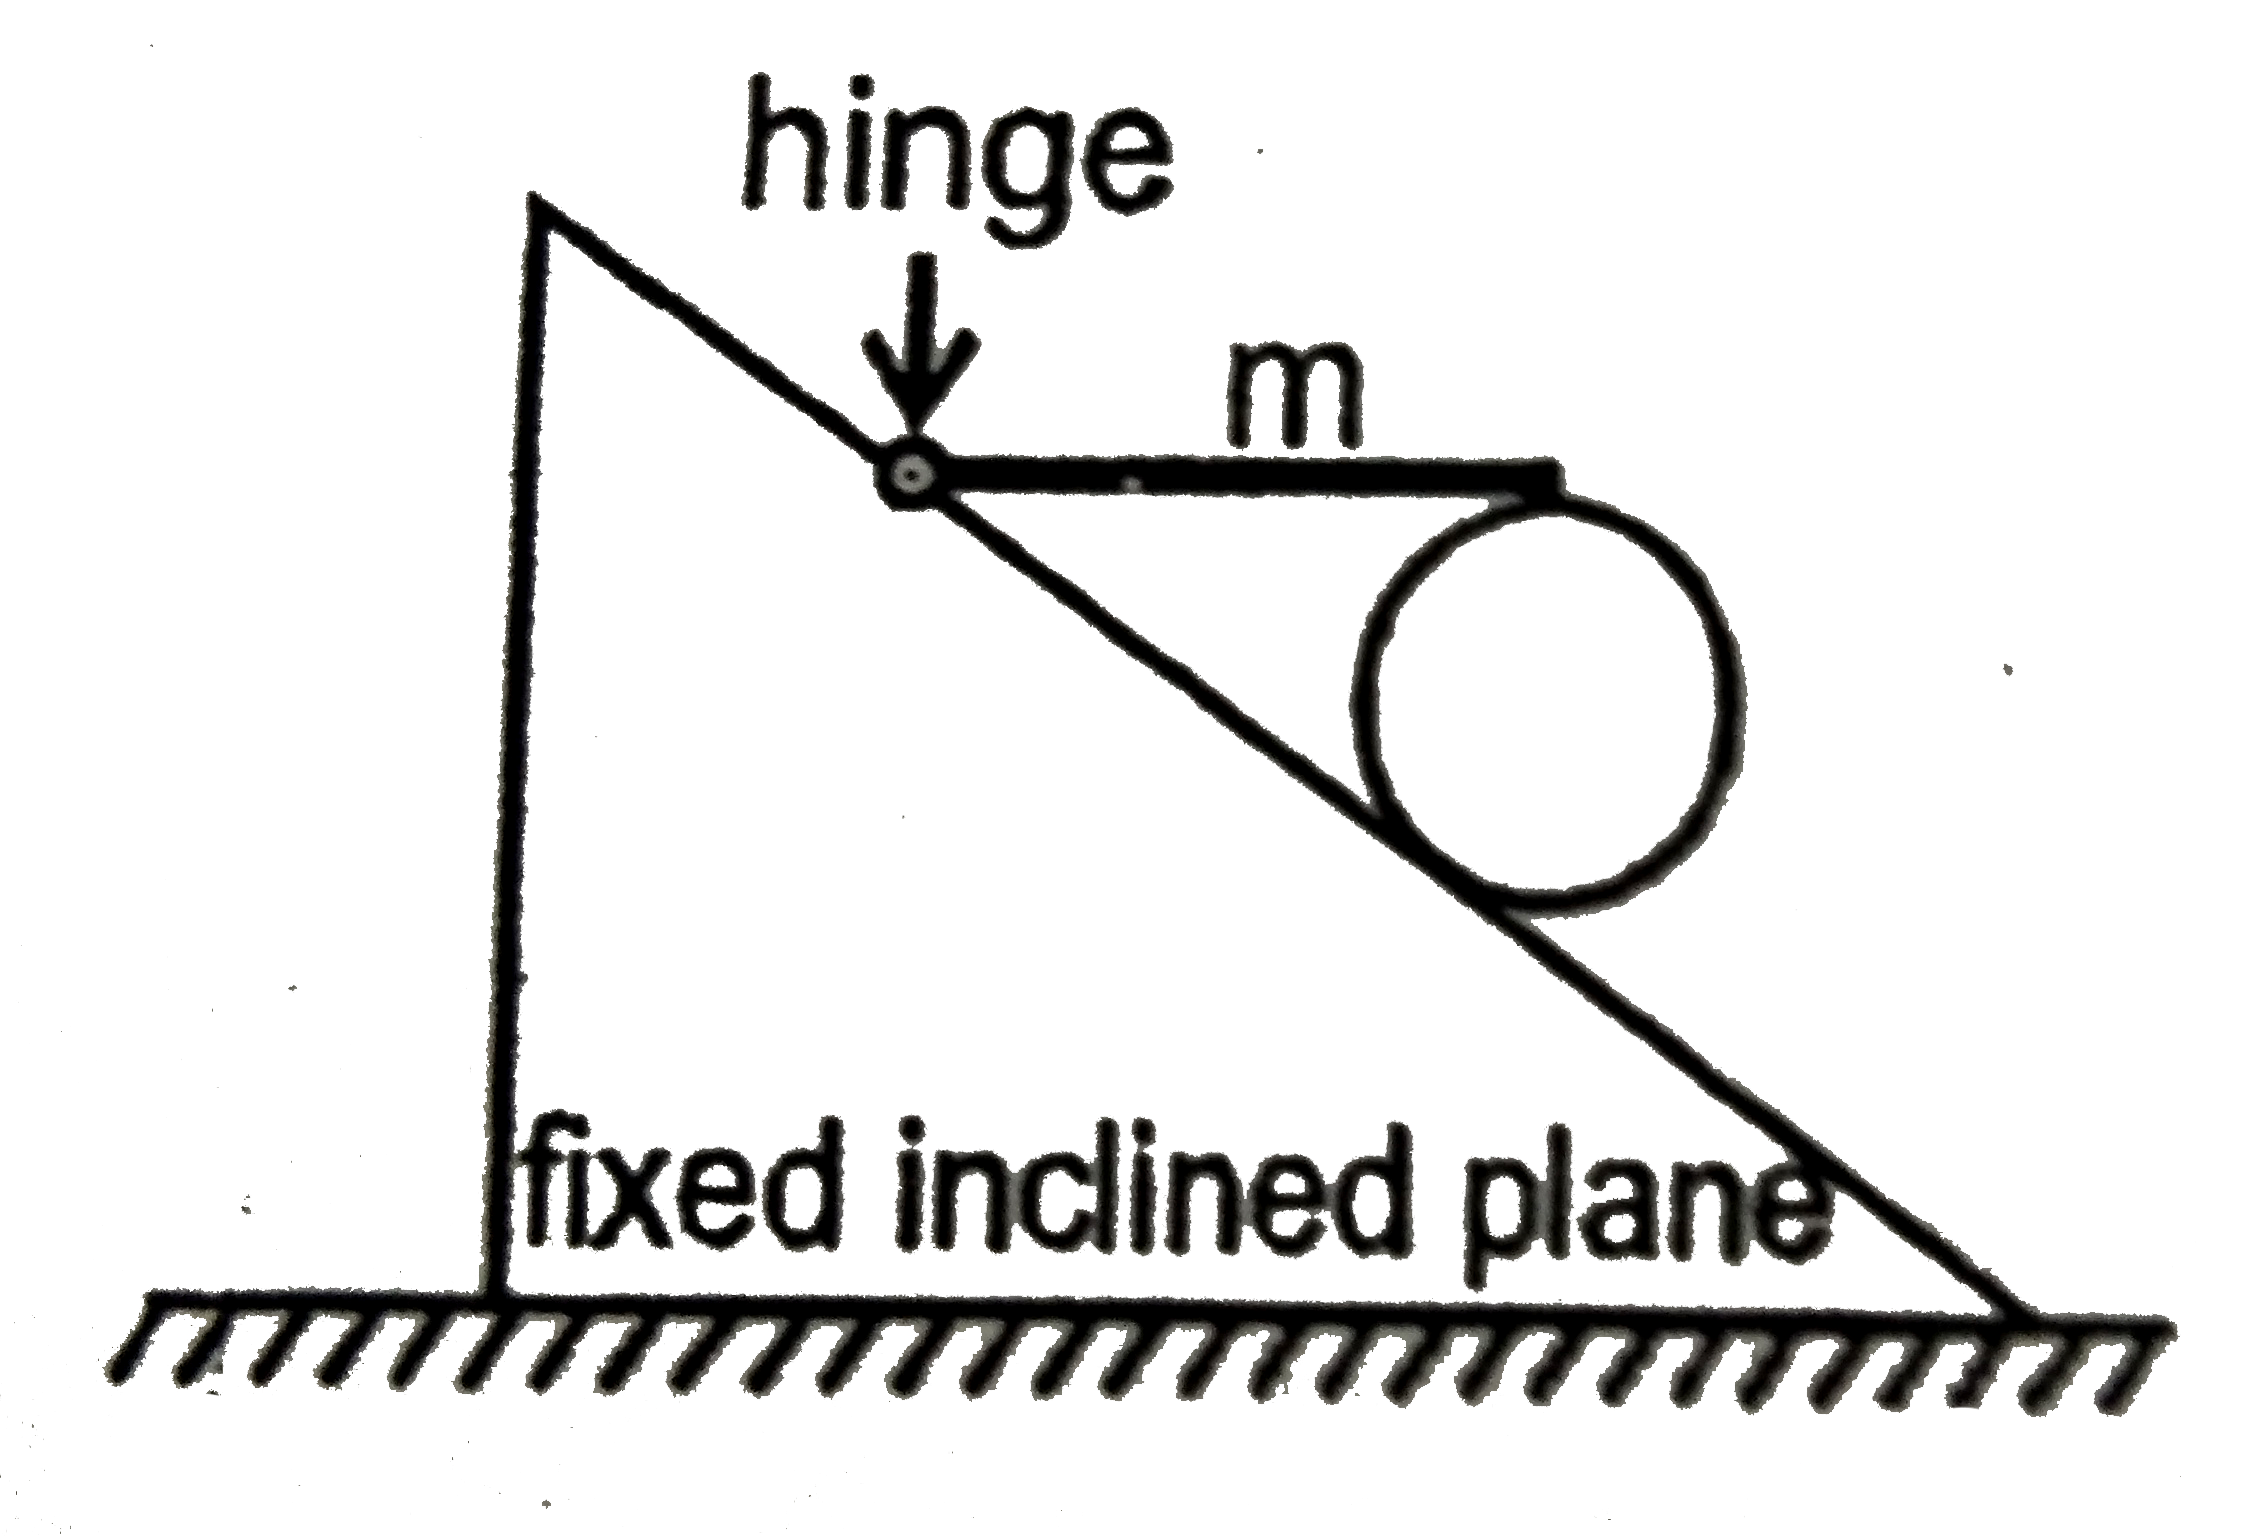 A horizontal uniform rod of mass 'm' has its left end hinged to the fixed incline plane, while its right end rrests on the top of a uniform cylinder of mass 'm' which in turn is at rest on the fixed inclined plane as shown. The coefficient of friction between the cylinder and rod, and between the cylinder and inclined plane, is sufficient to keep the cylinder at rest.      The magnitude of normal reaction exerted by the inclinded plane on the cylinder is :